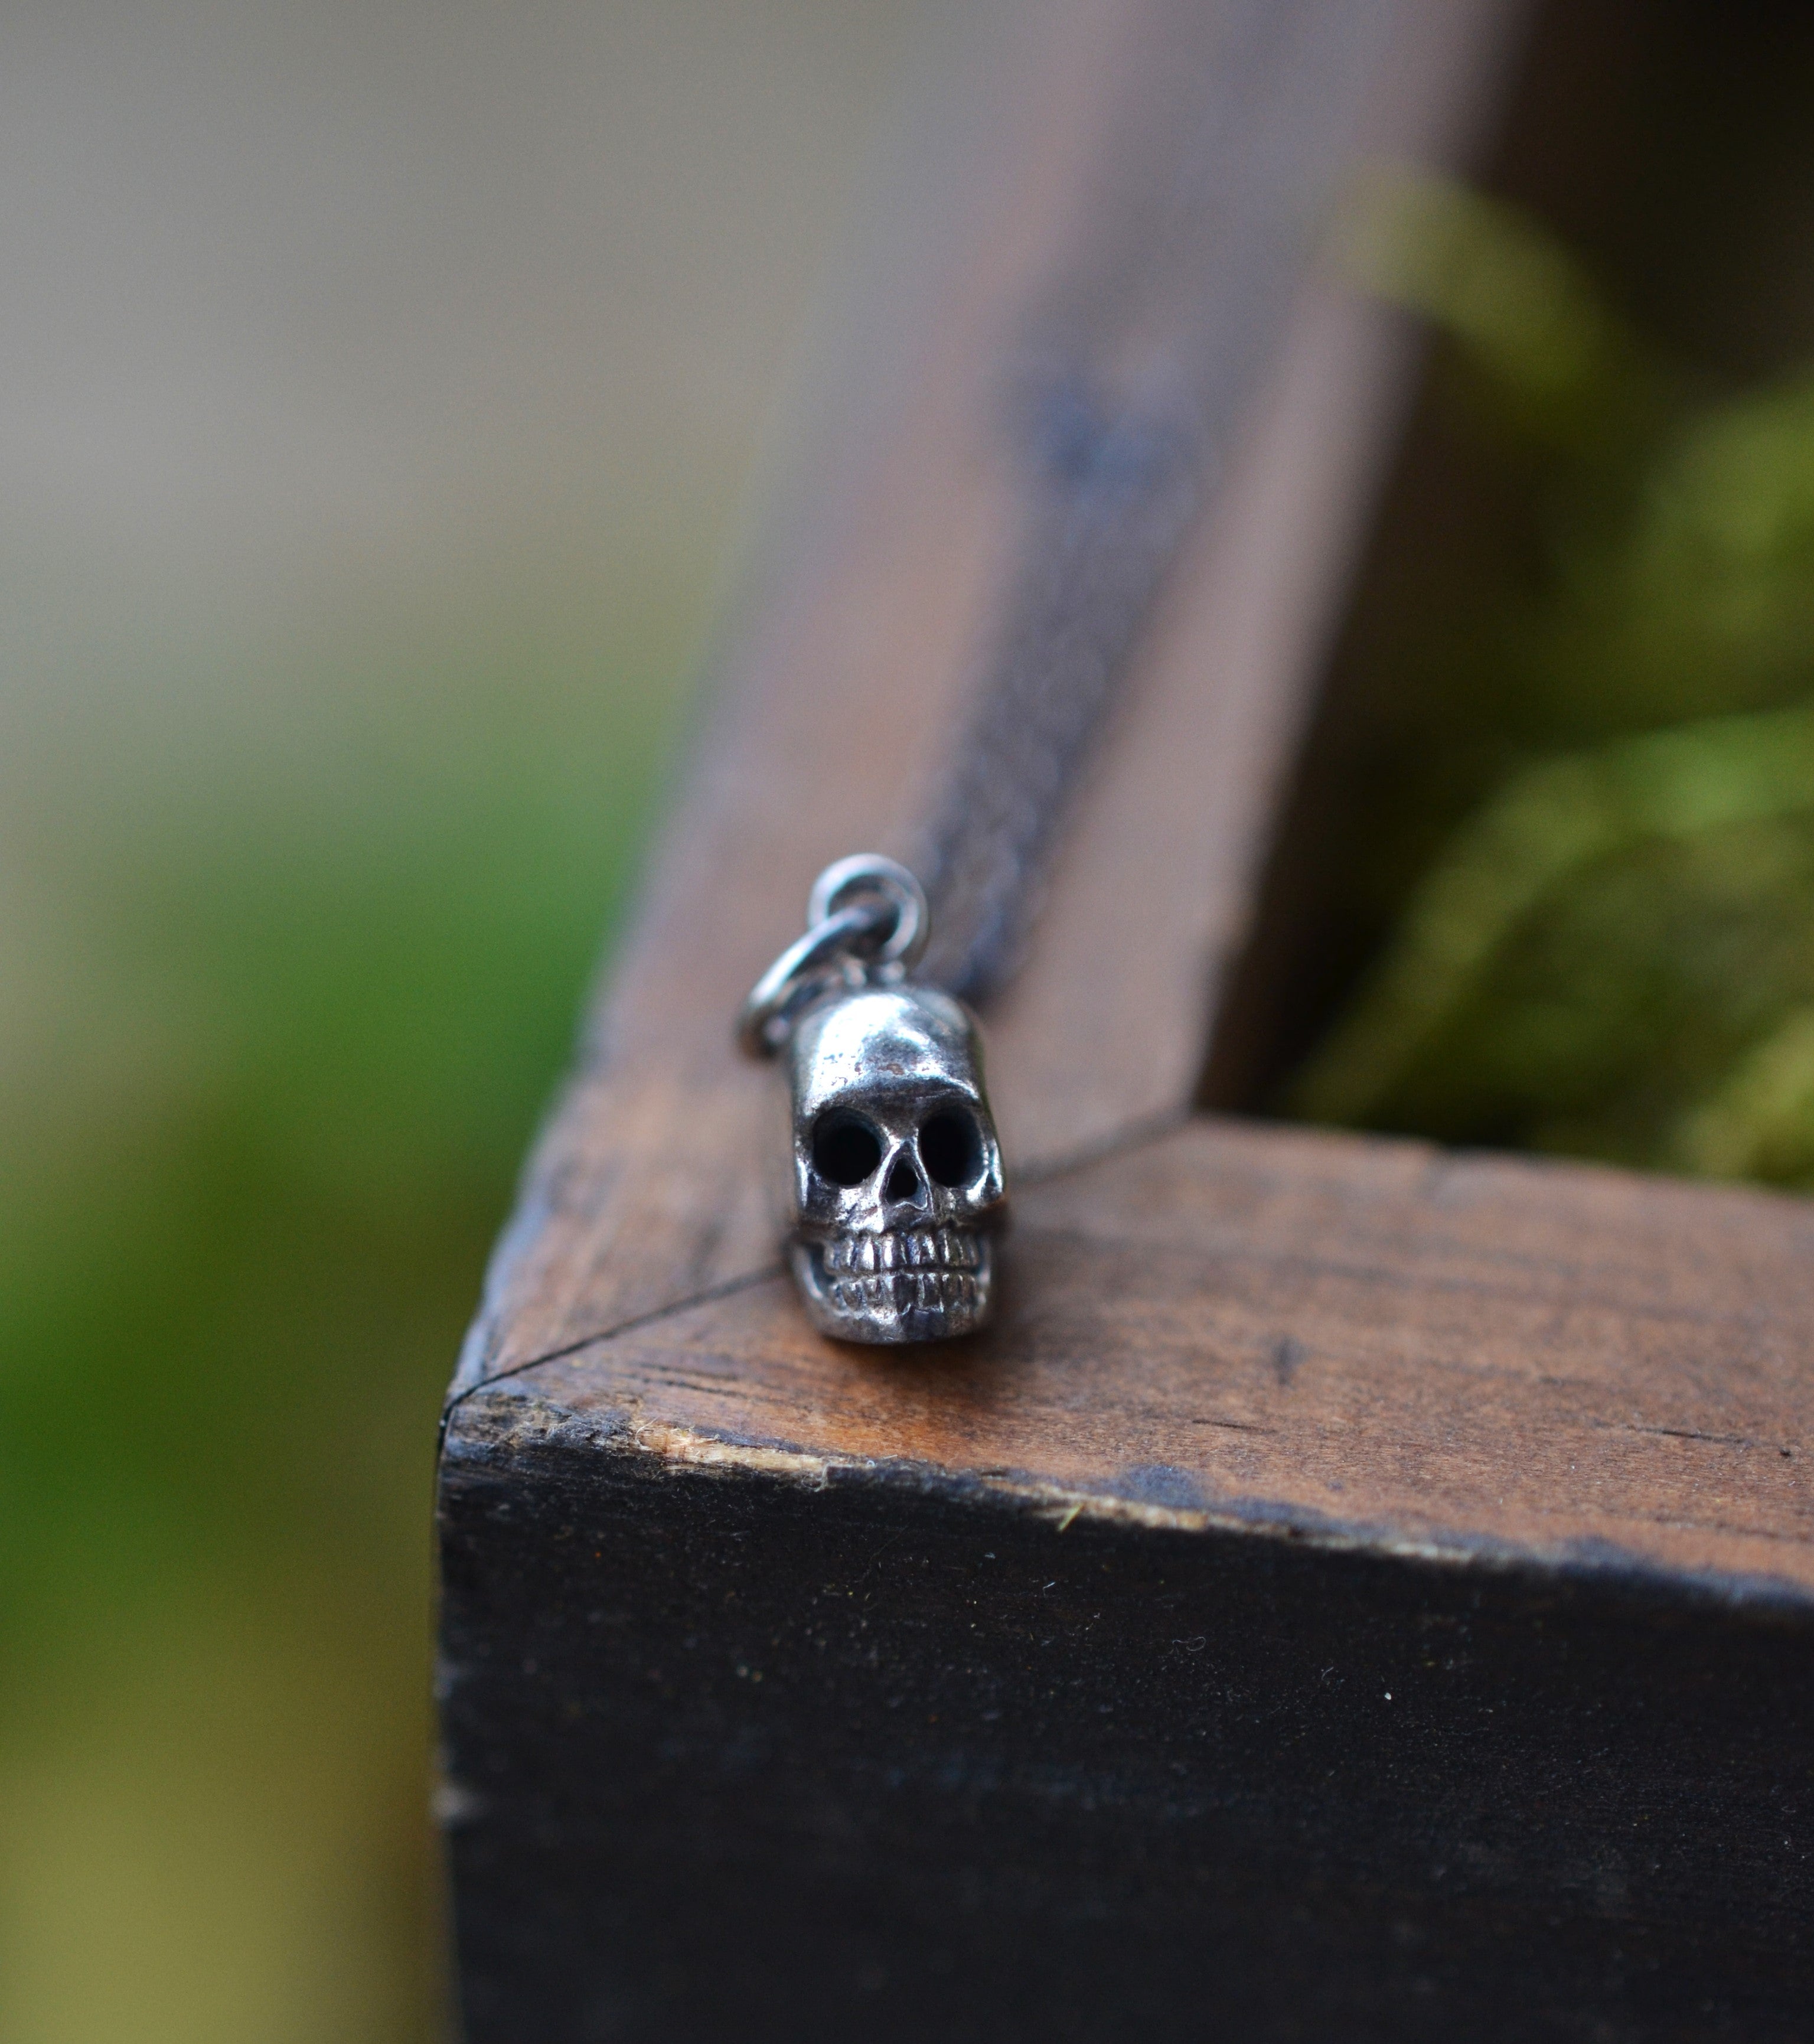 Small Skull Charm Necklace - Sterling Silver - 20" Delicate Cable Chain Included